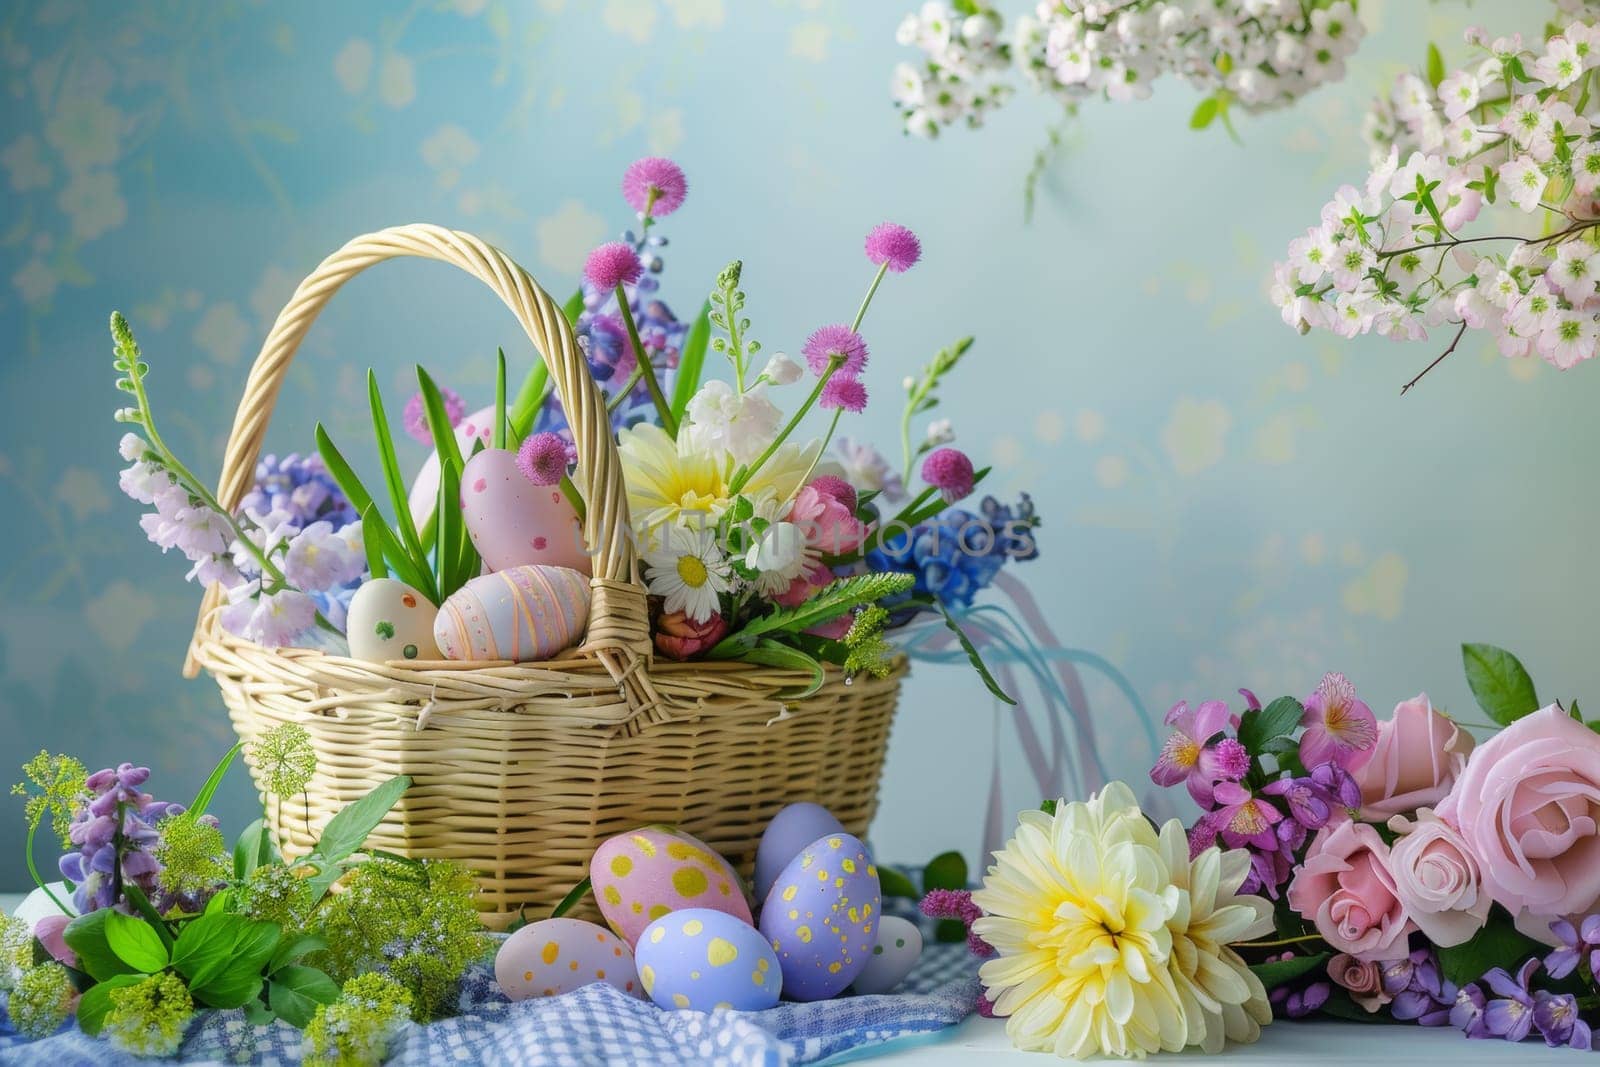 A basket of Easter eggs and flowers sits on a table. The basket is filled with a variety of colorful flowers and eggs, including pink and yellow ones